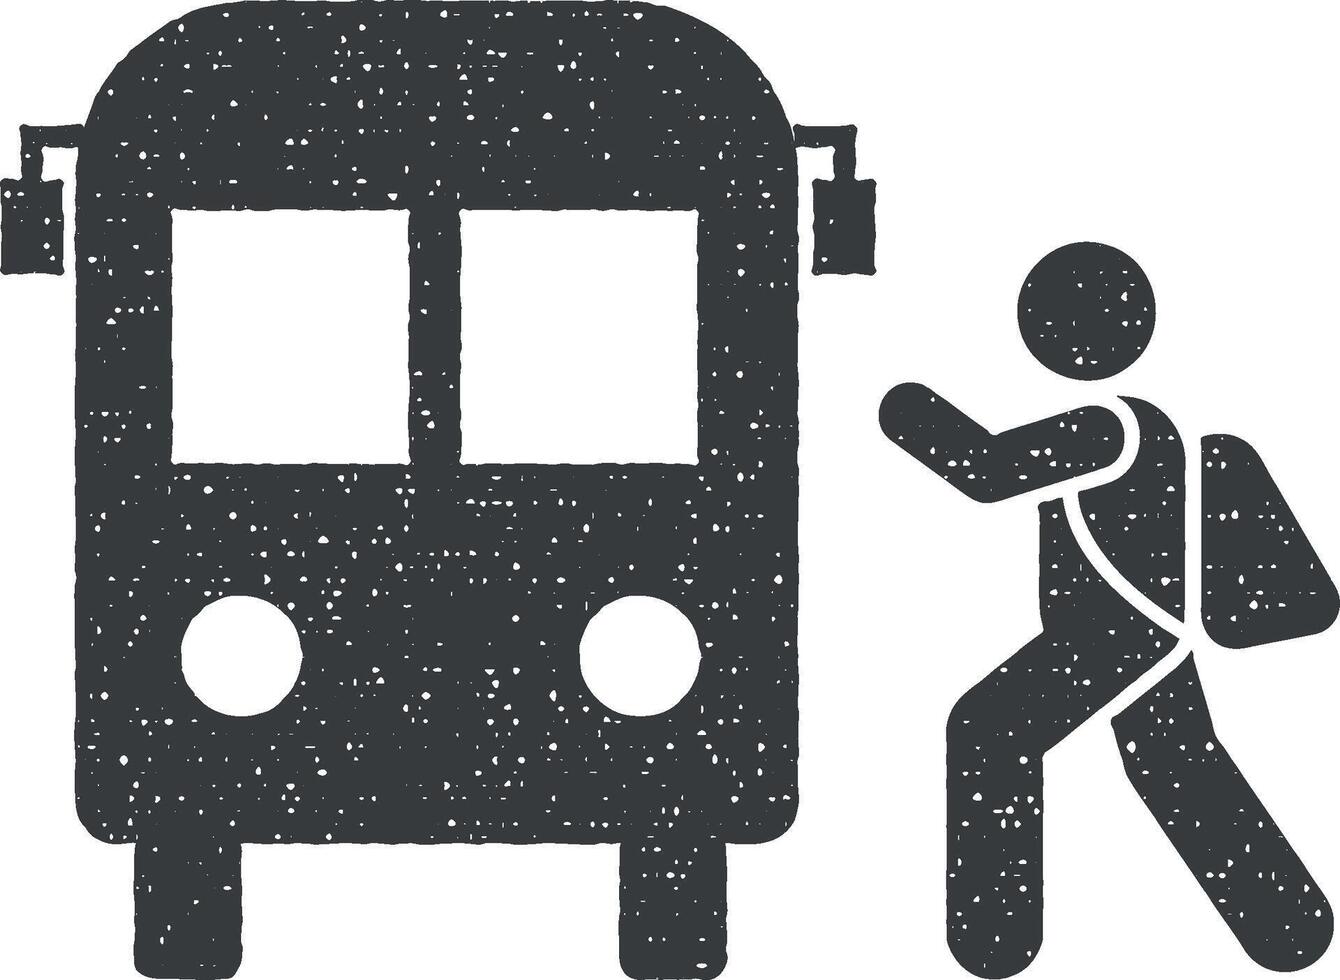 Bus, boy, school, go icon vector illustration in stamp style